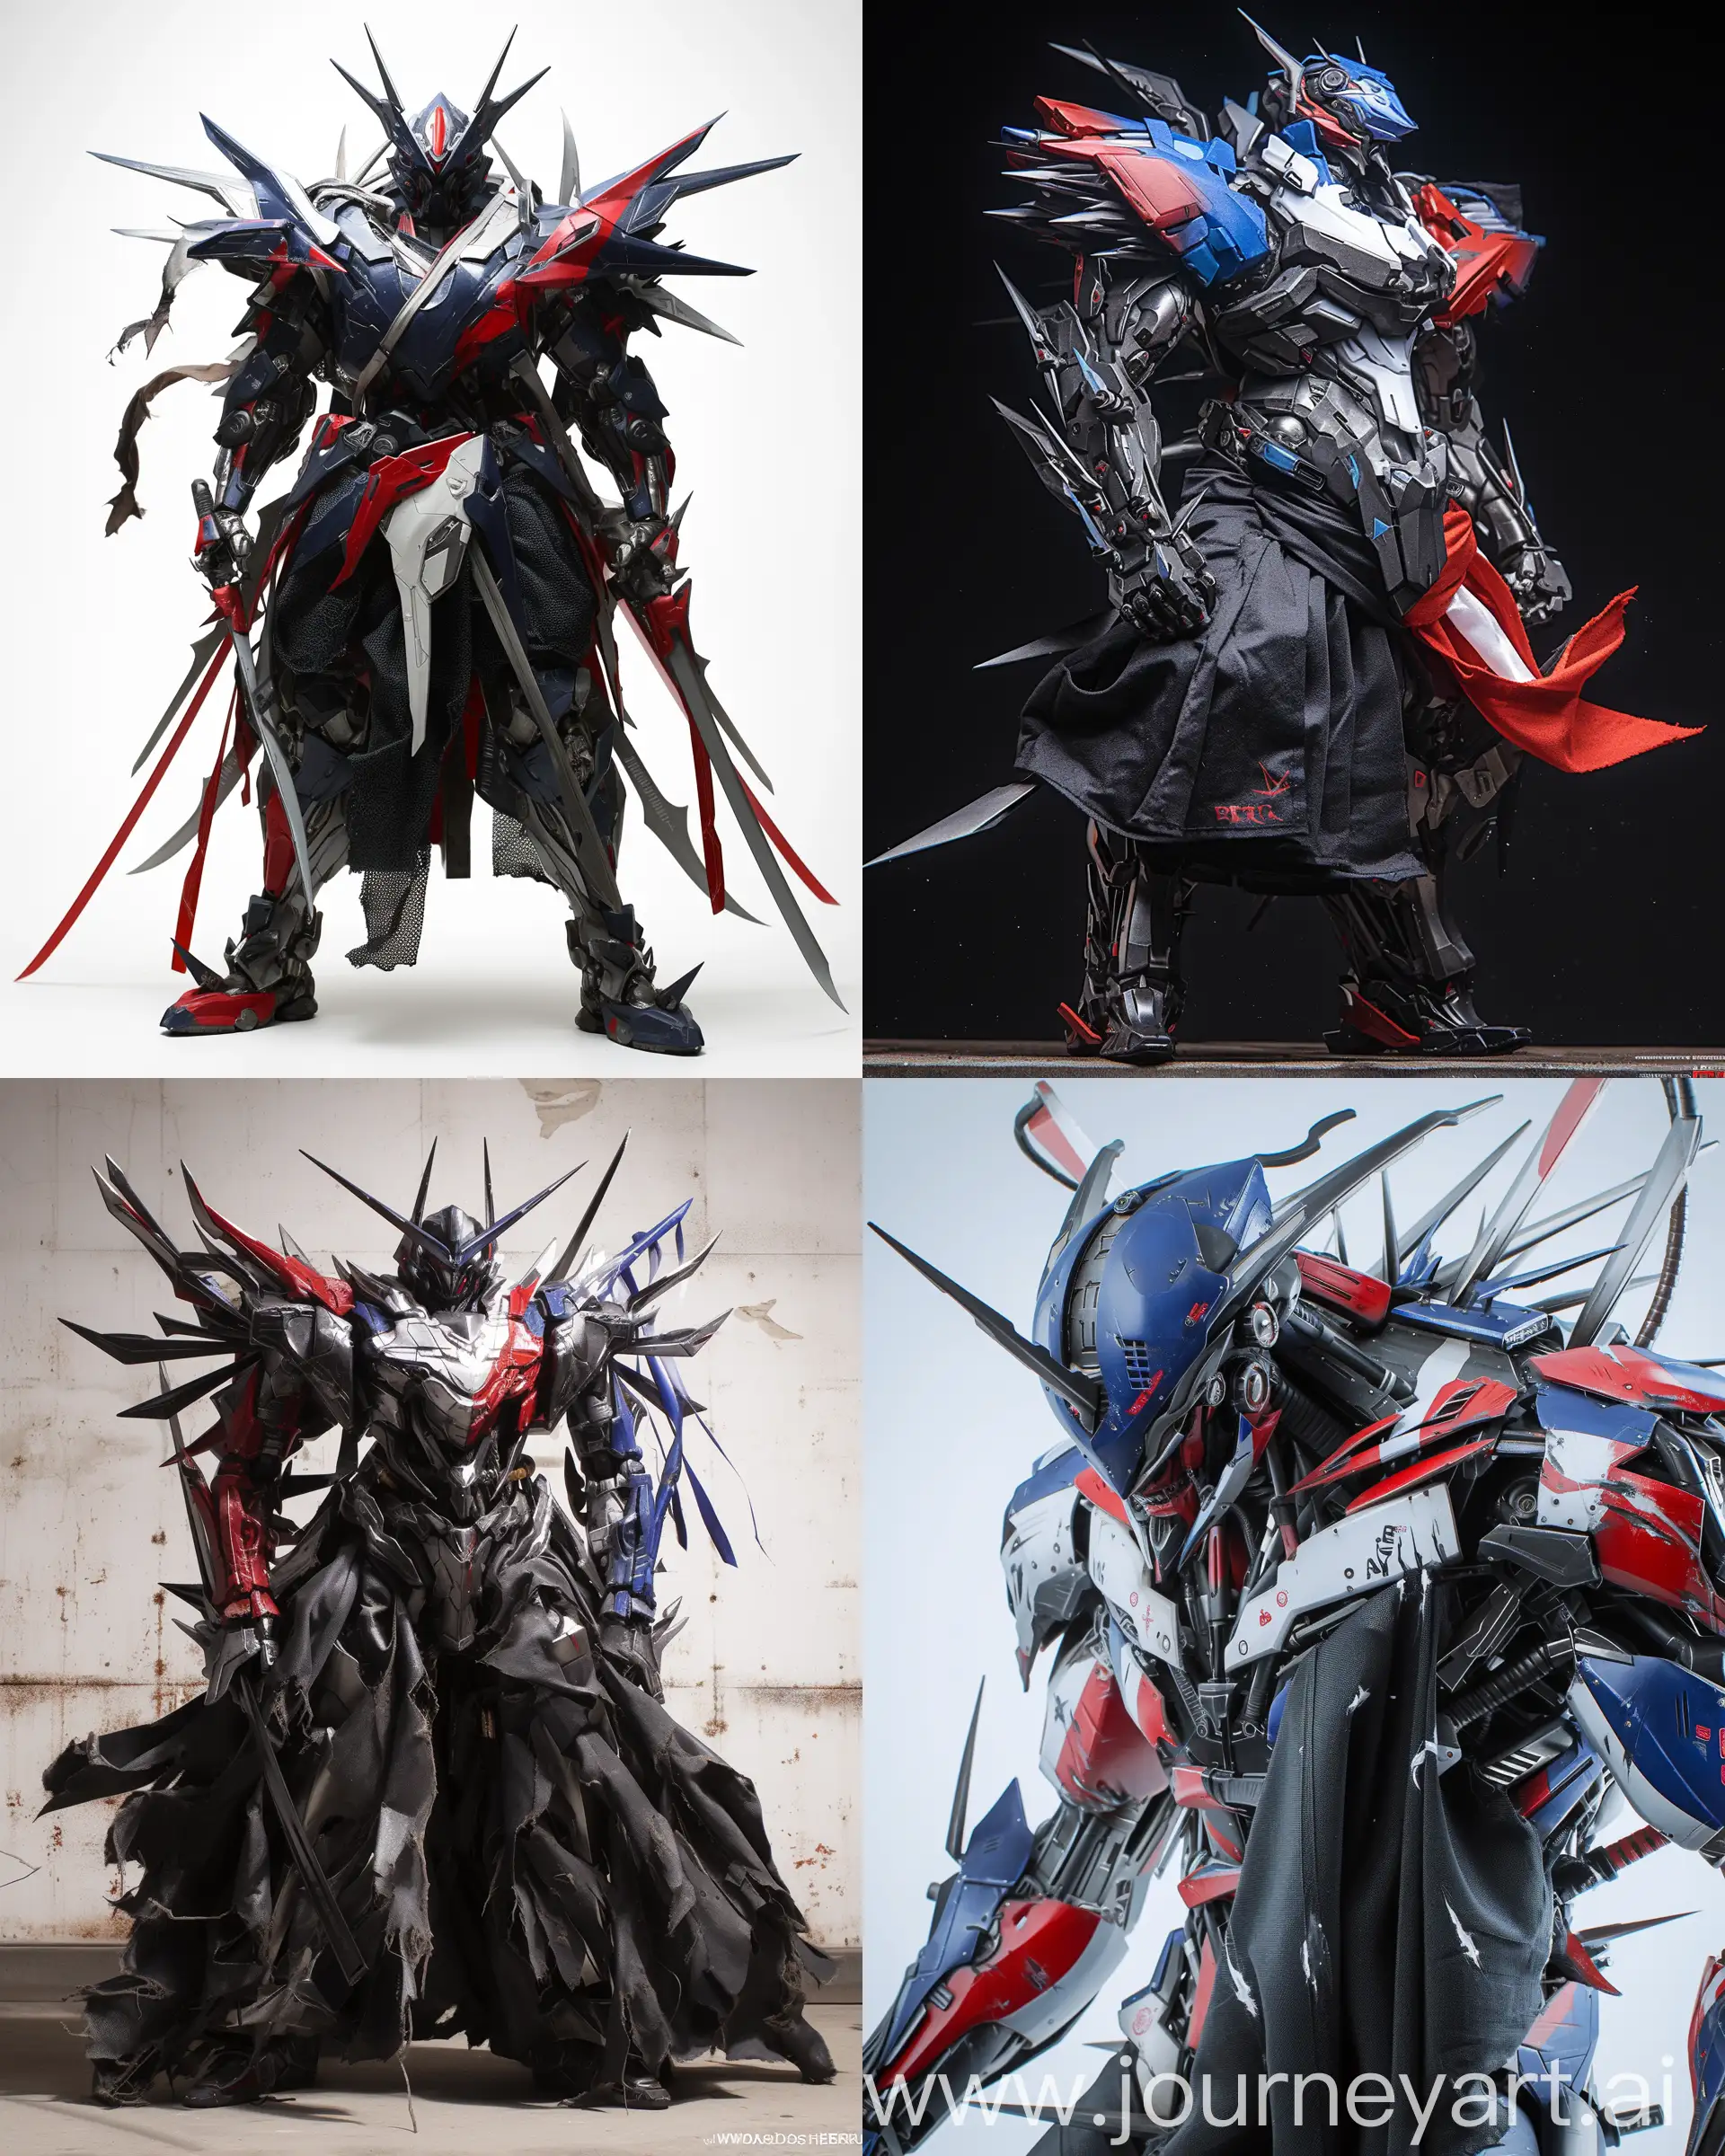 extreme realism, hyper-detailed real photo, full-body image of a futuristic menacing robot, go brrr, elite heistcore, hyper-realistic, red, white and blue color scheme mech suit made of steel blades, 😱 chaos · nightmare resin, black metallic samurai garment, saudi futuristic warrior mecha, full-cosplay, 🕹️ 😎 🔫 🤖 🚬, painted action figure, stealth suit, full costume, shot by Walter Loss Jr’s super-16 —niji 6 —ar 4:5
